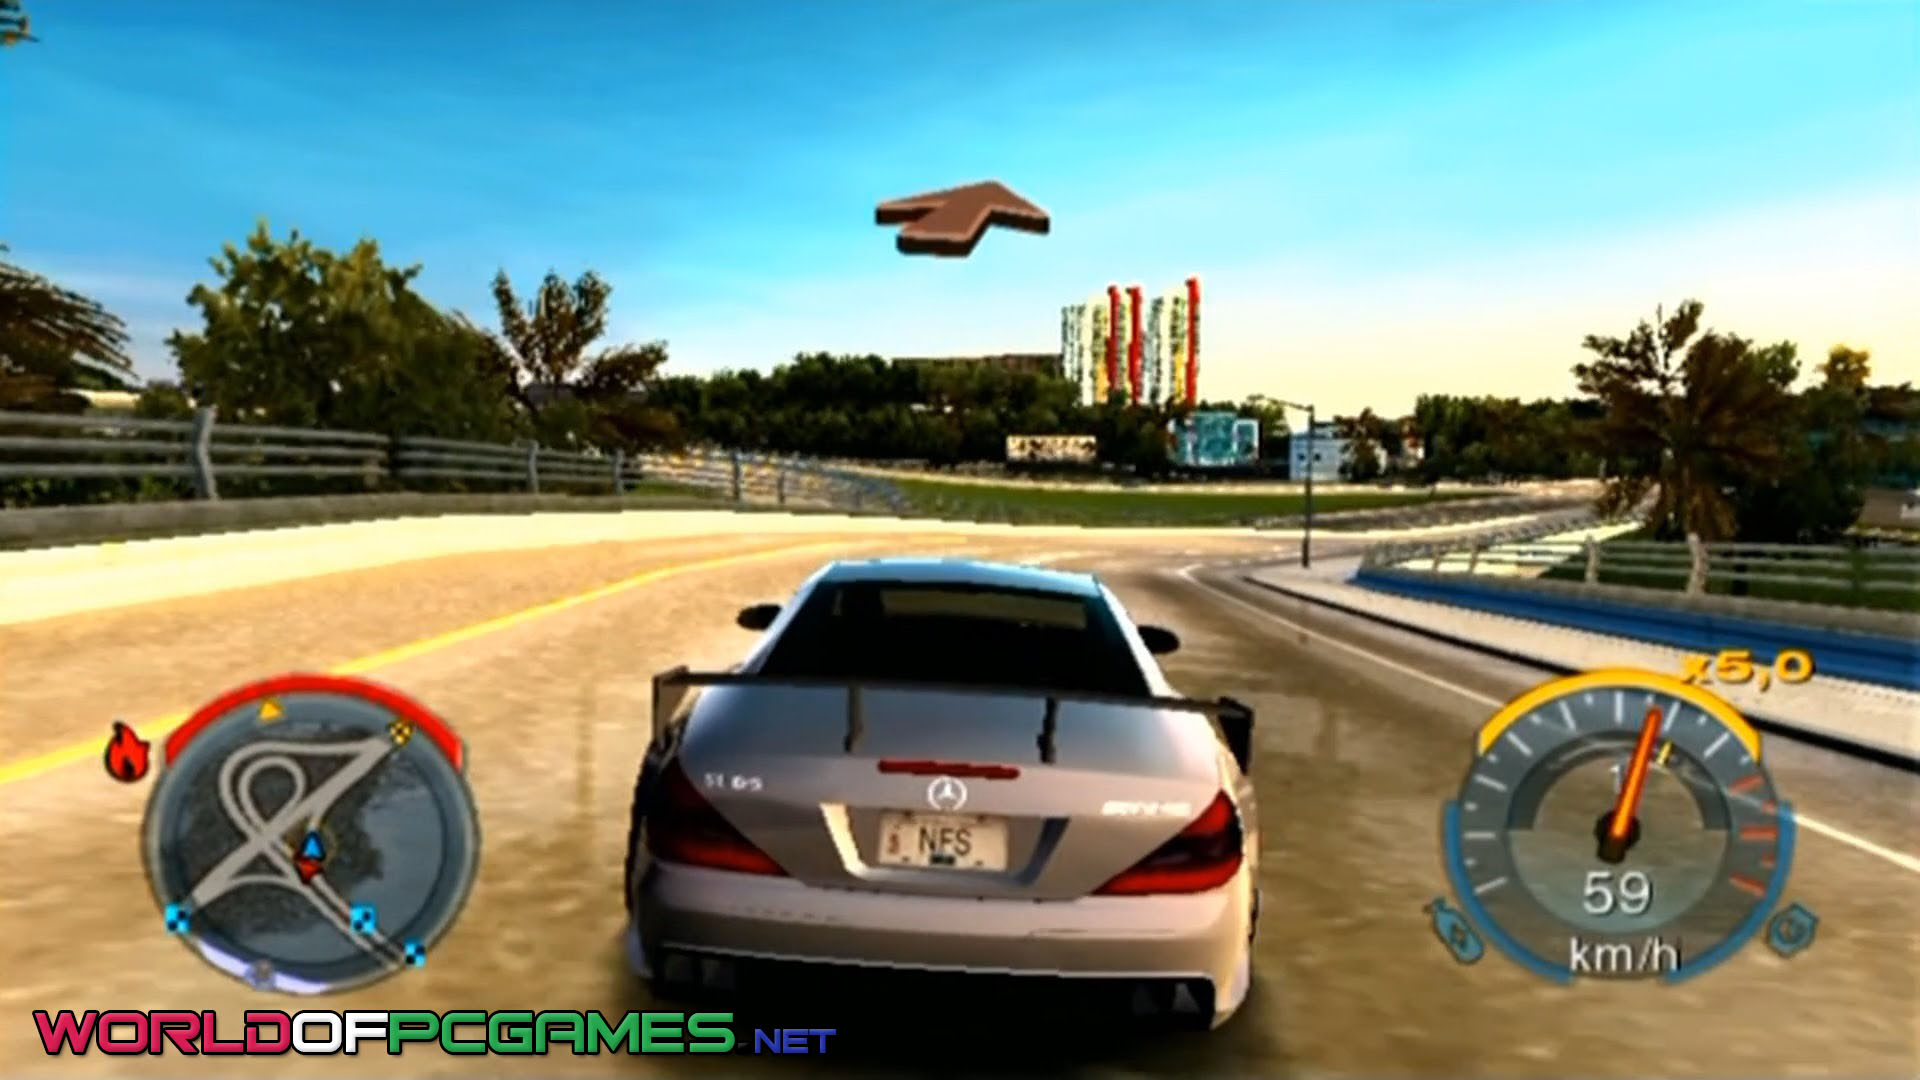 Need For Speed Undercover Free Download By worldof-pcgames.net